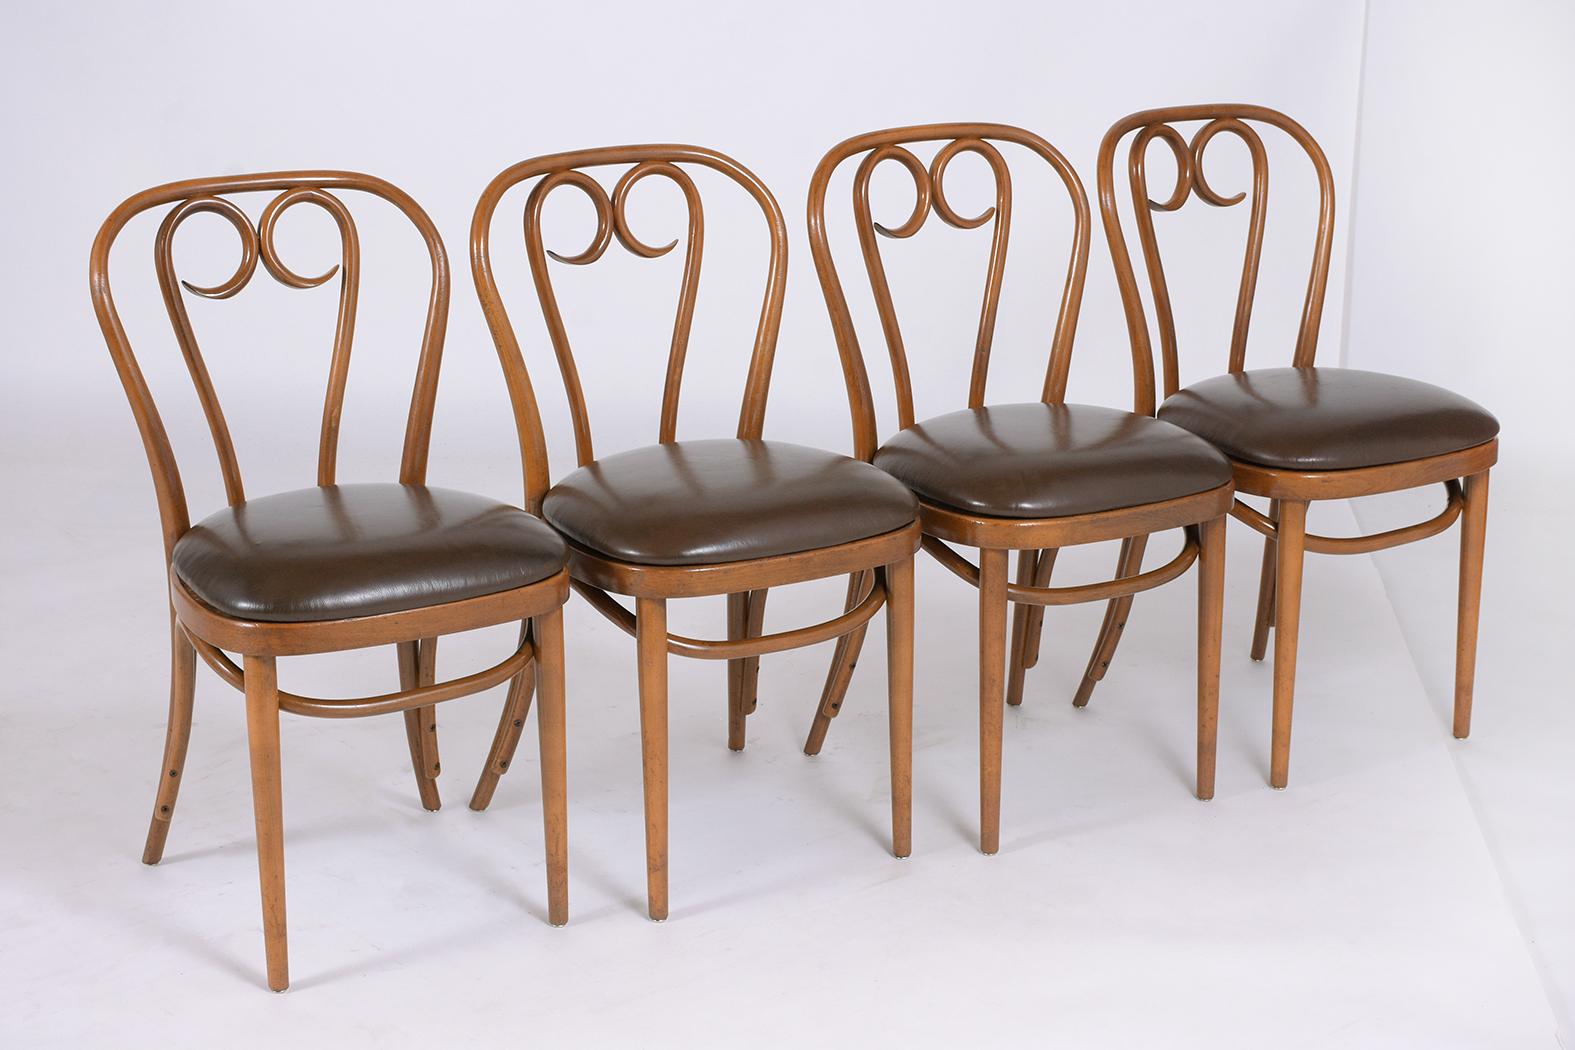 Art Nouveau Art-Deco Thonet Bentwood Leather Dining Chairs with Walnut Finish - Set of Six For Sale